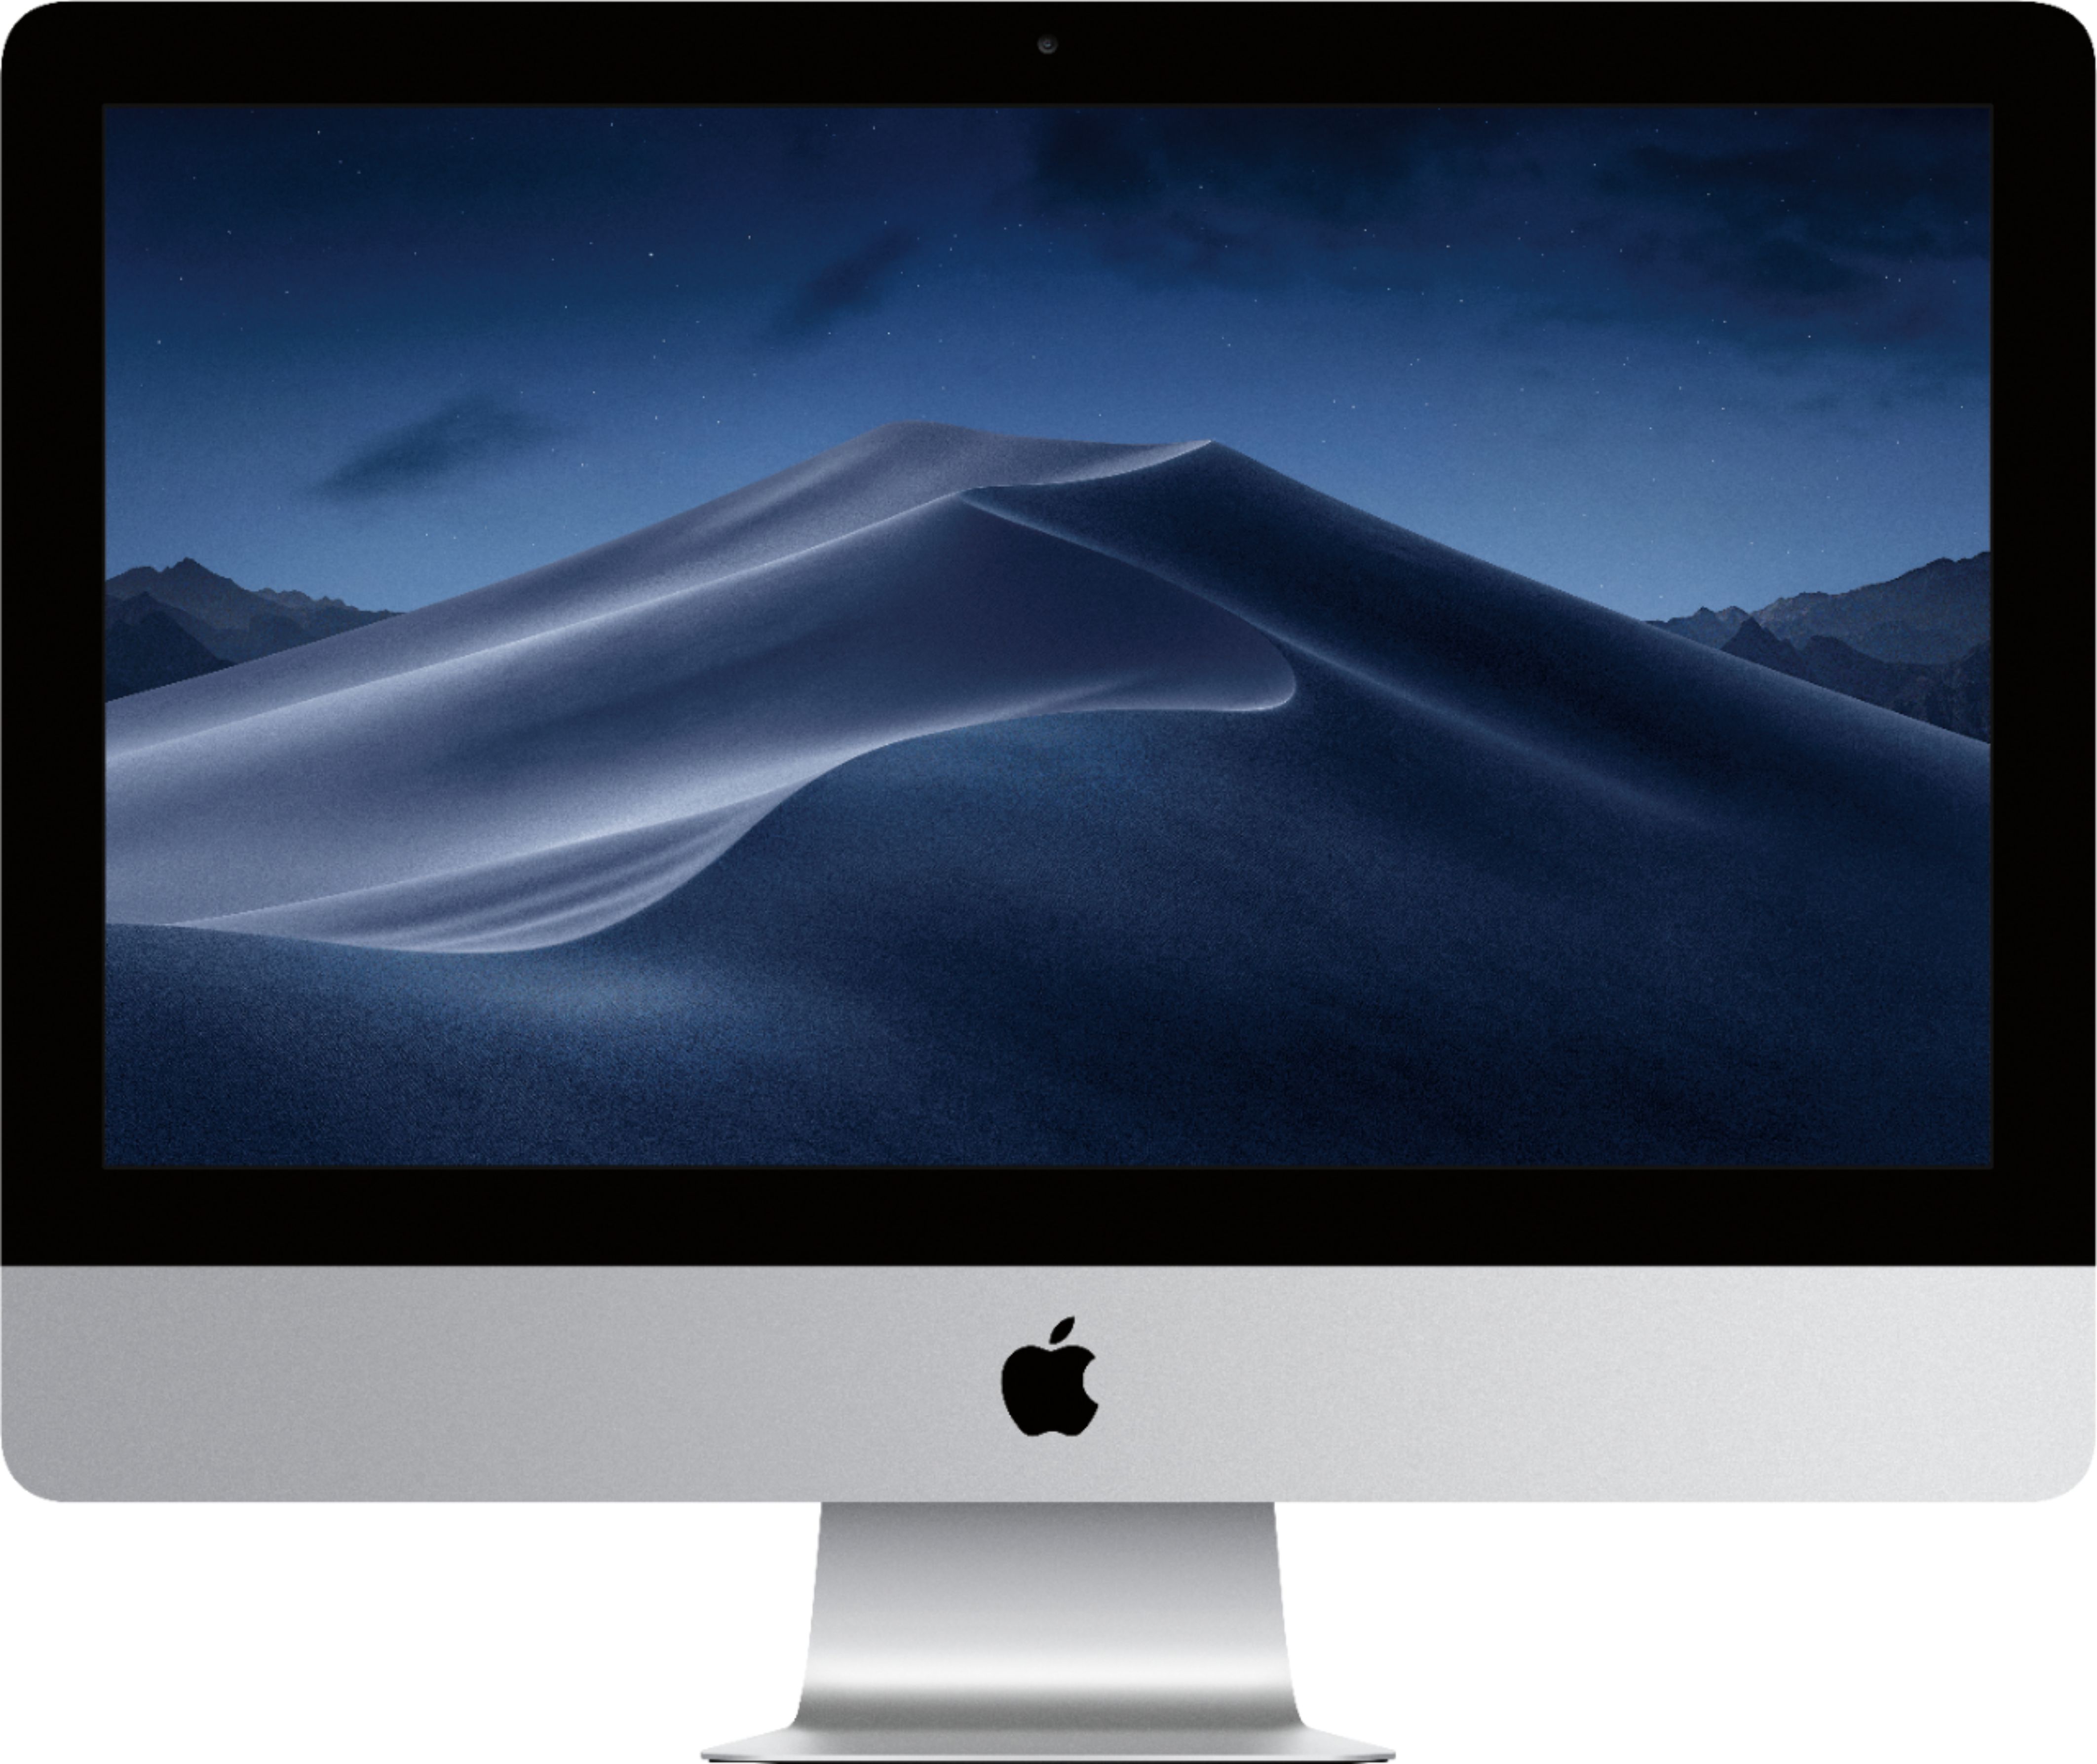 Apple iMac 21.5" FHD All-in-One with Intel Quad Core i5 / 8GB / 1TB / Mac OS X + Free Software Download